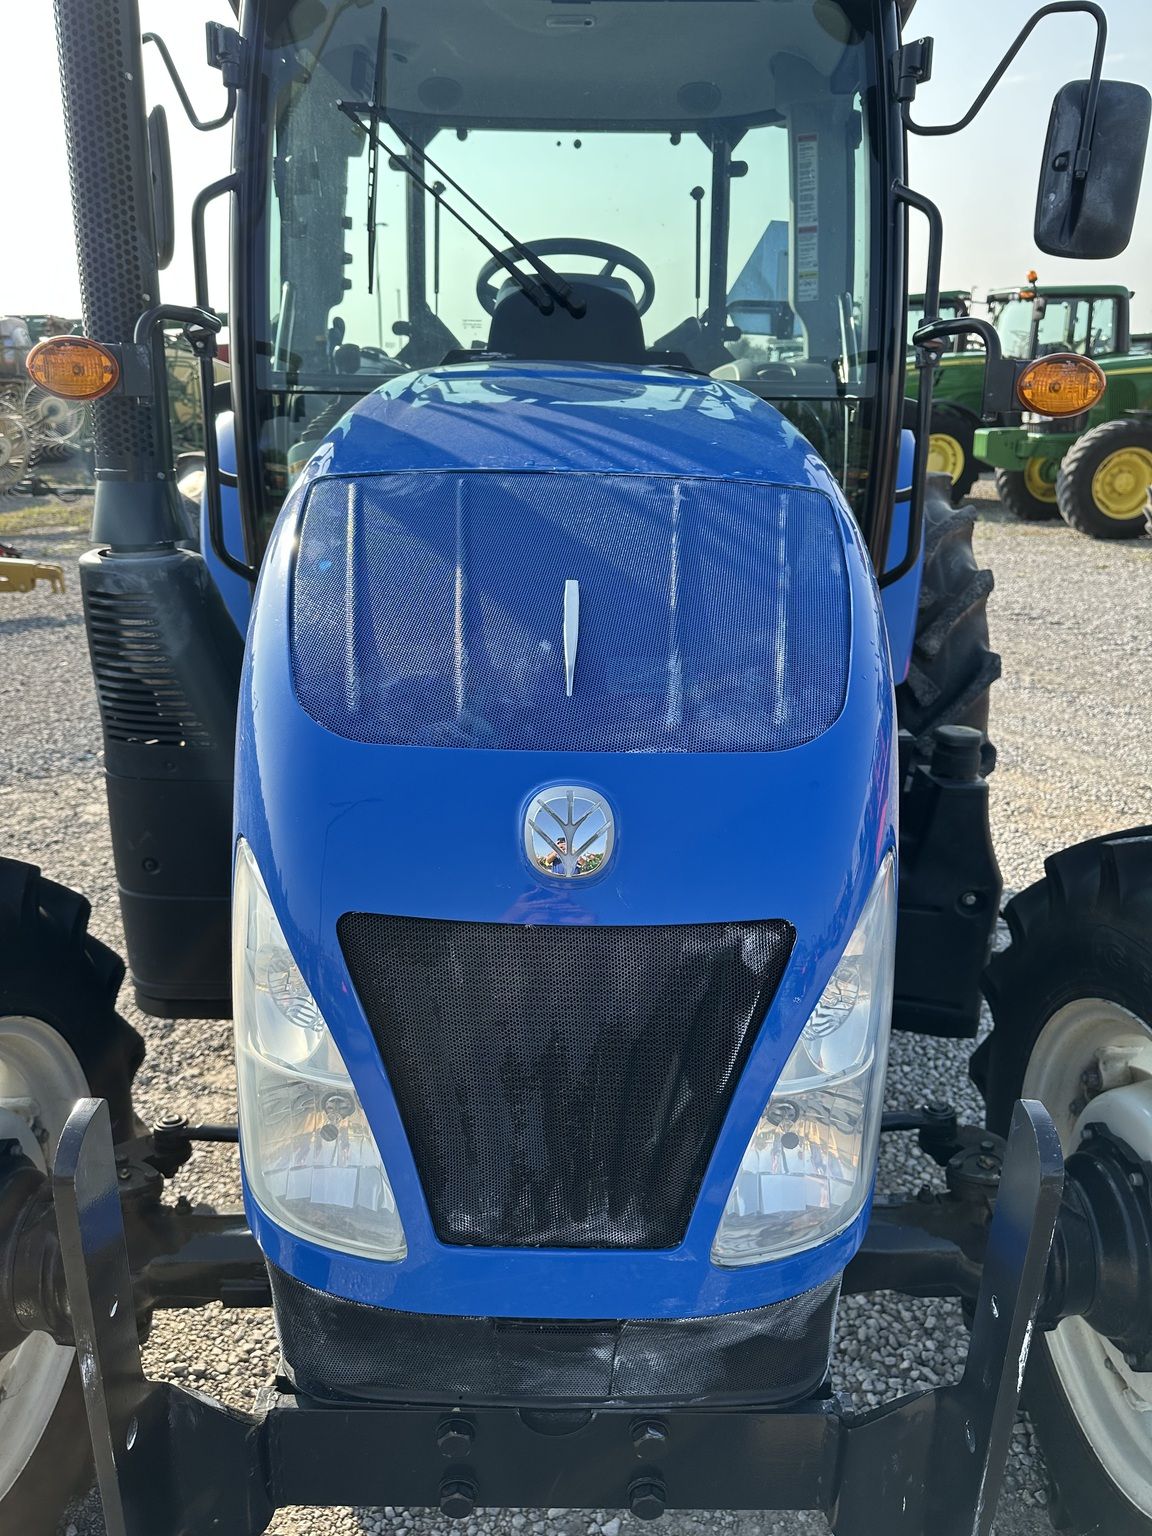 2015 New Holland T4.90